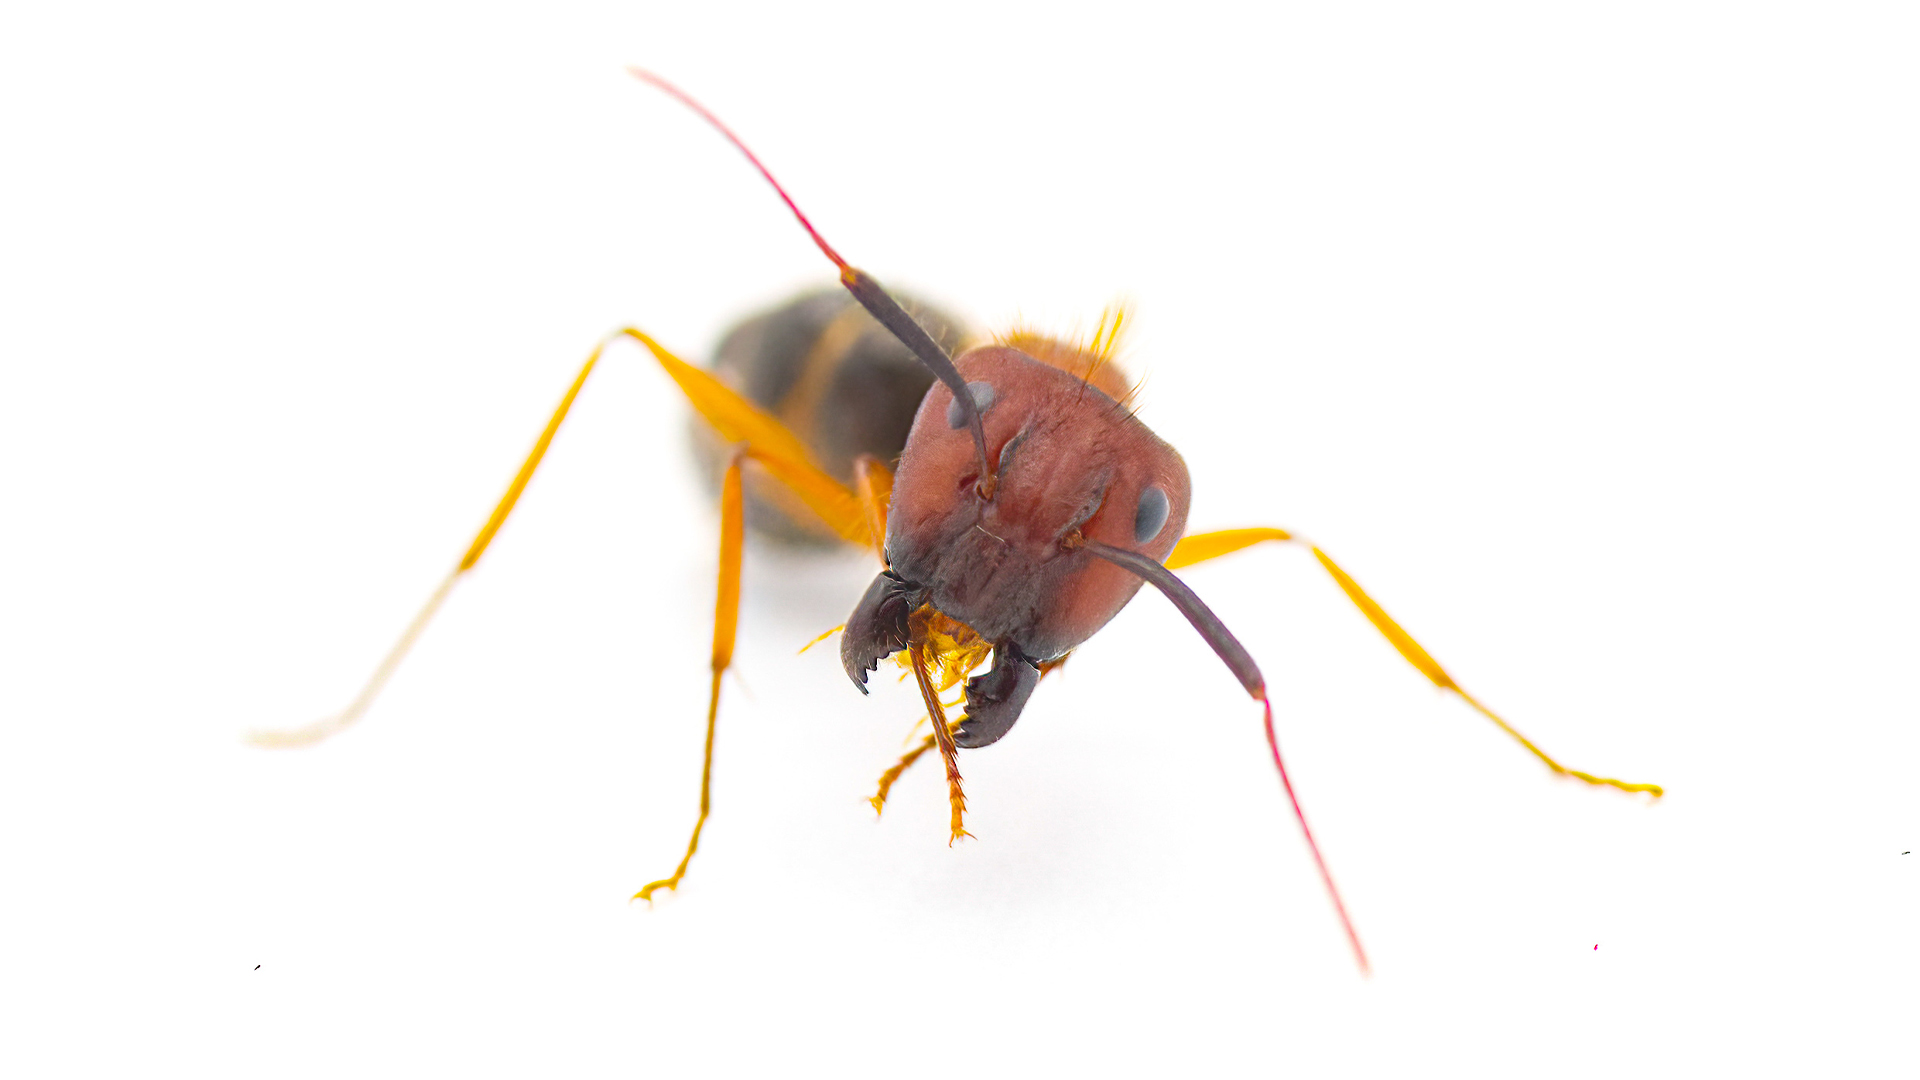 red and brown carpenter ant with yellow legs against a white background